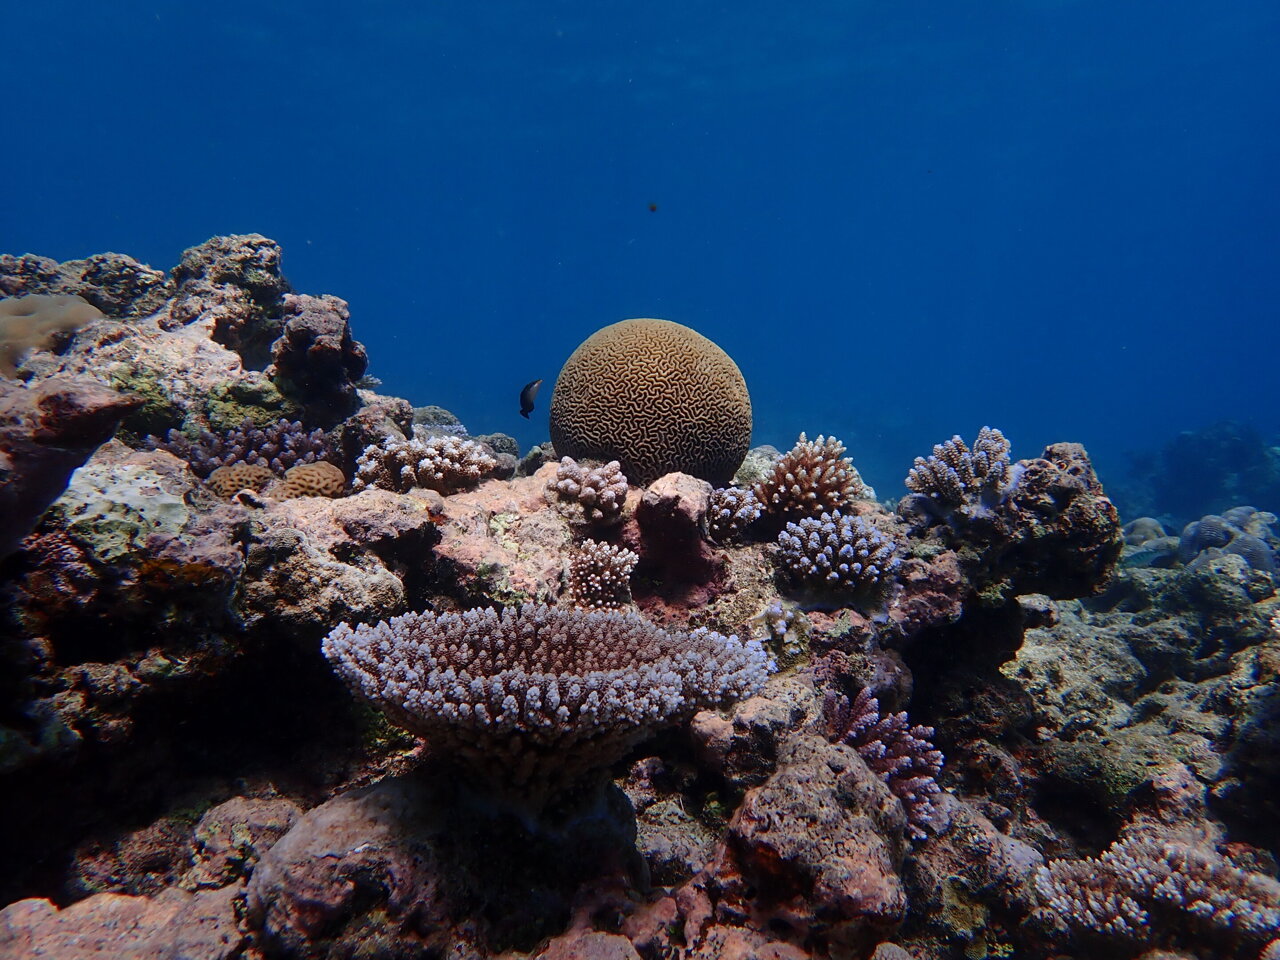 CASE STUDY: Pacific coral reef management in a changing climate – PIRCA